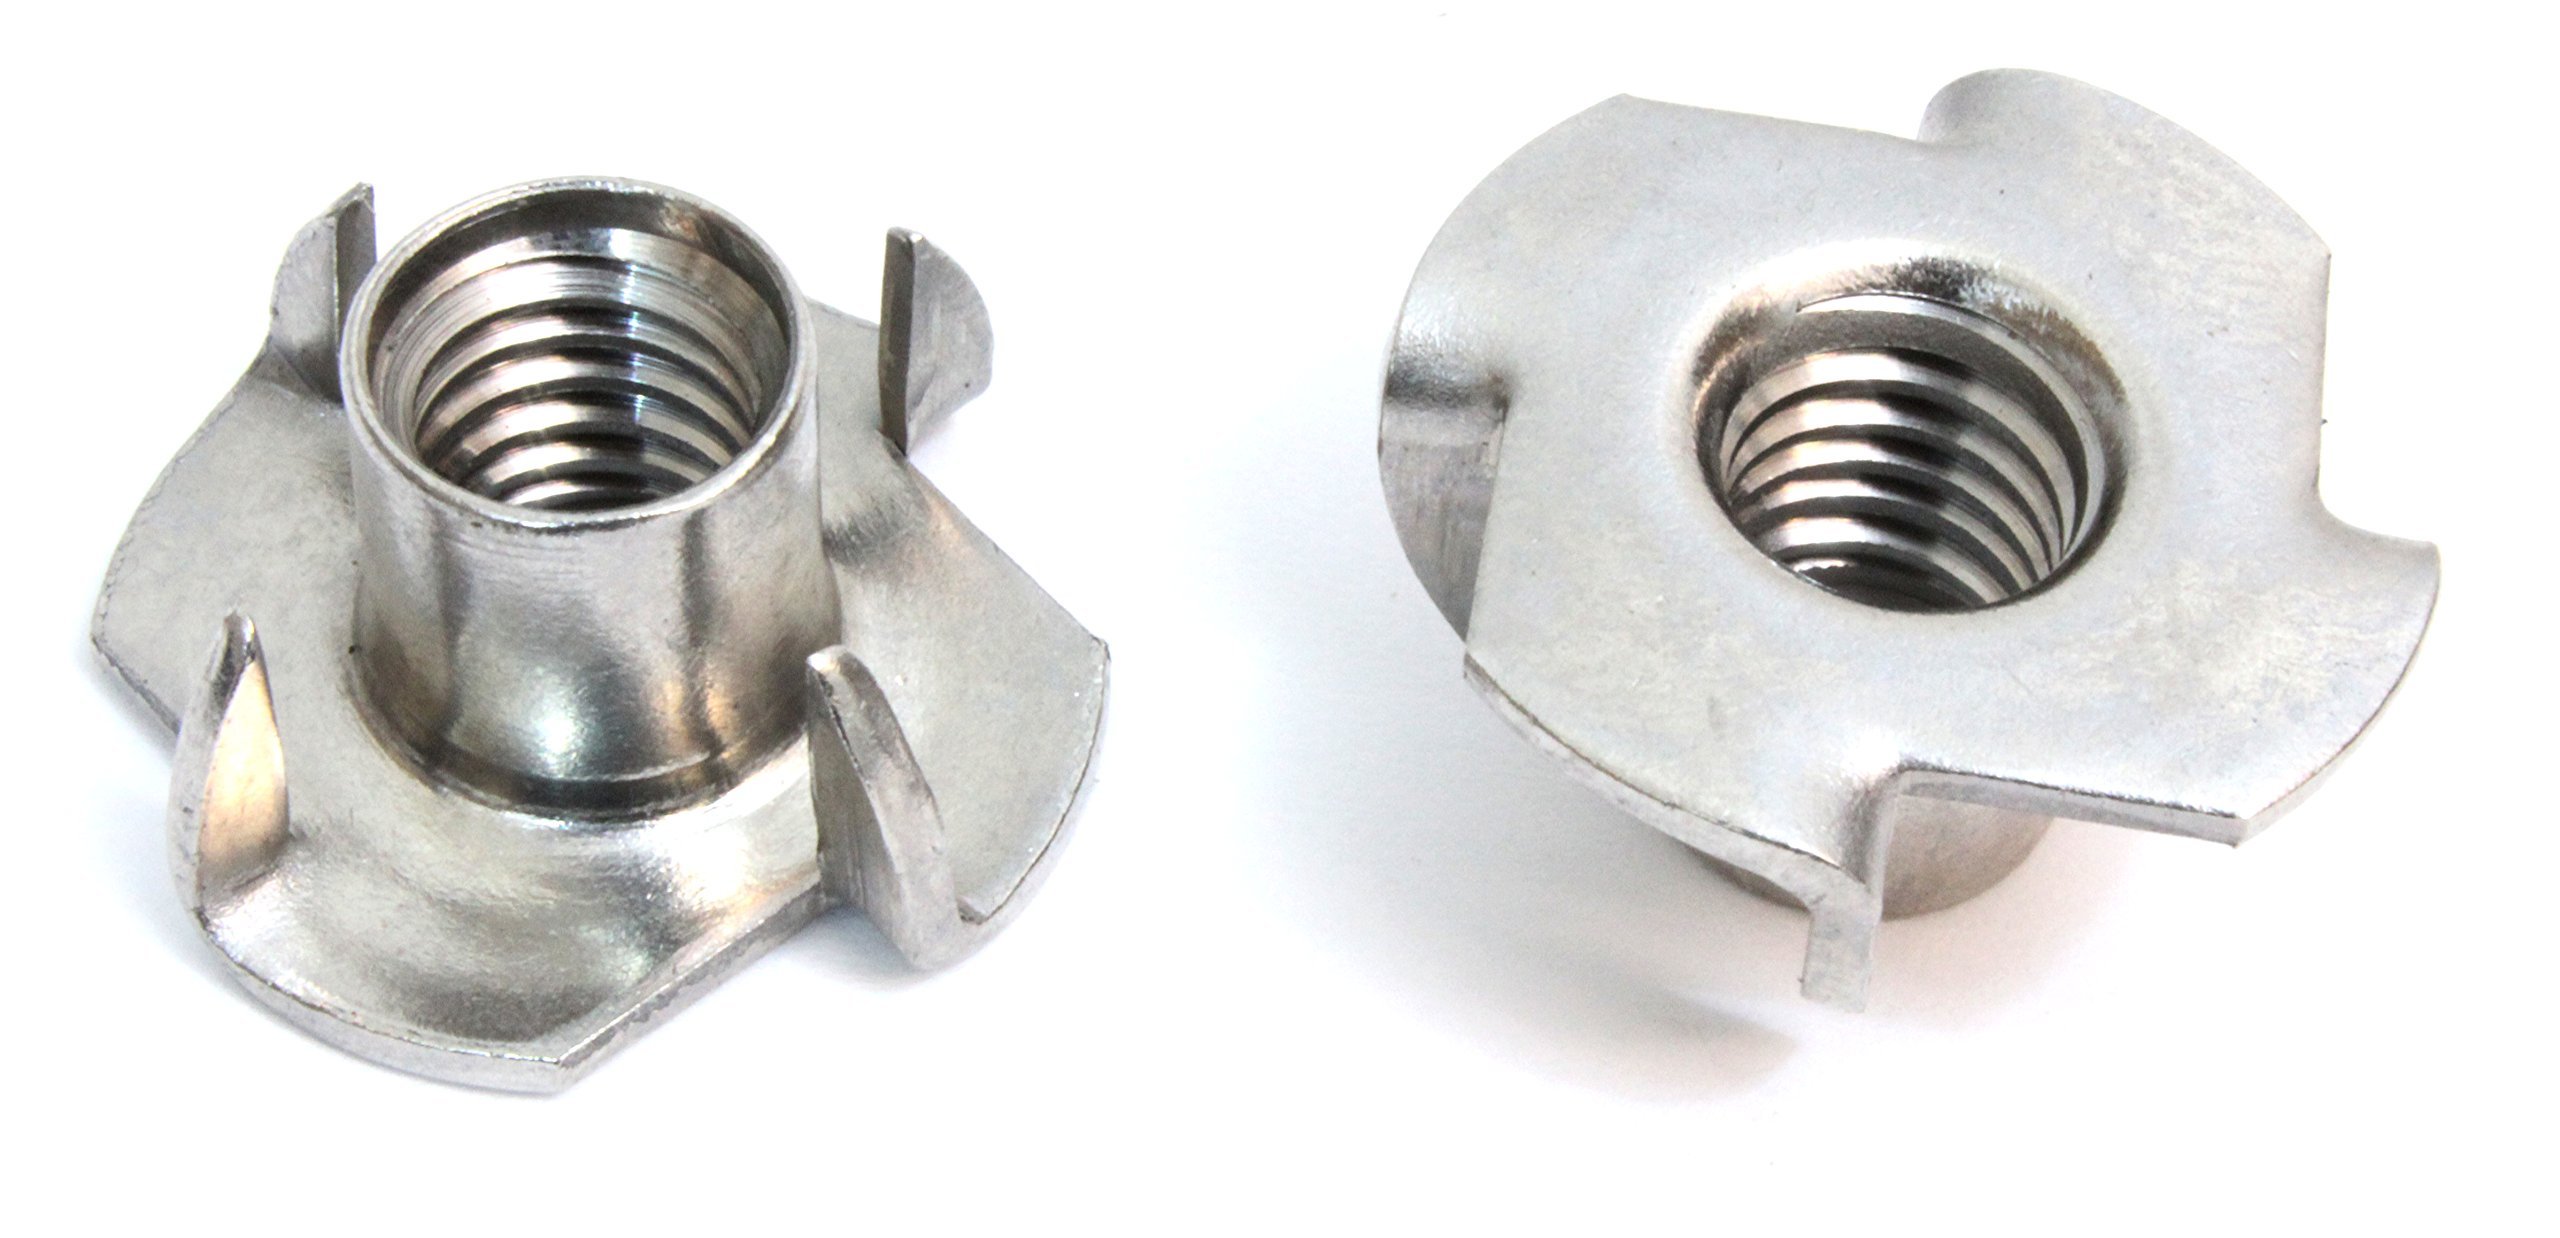 You are currently viewing What is a tee nut used for?